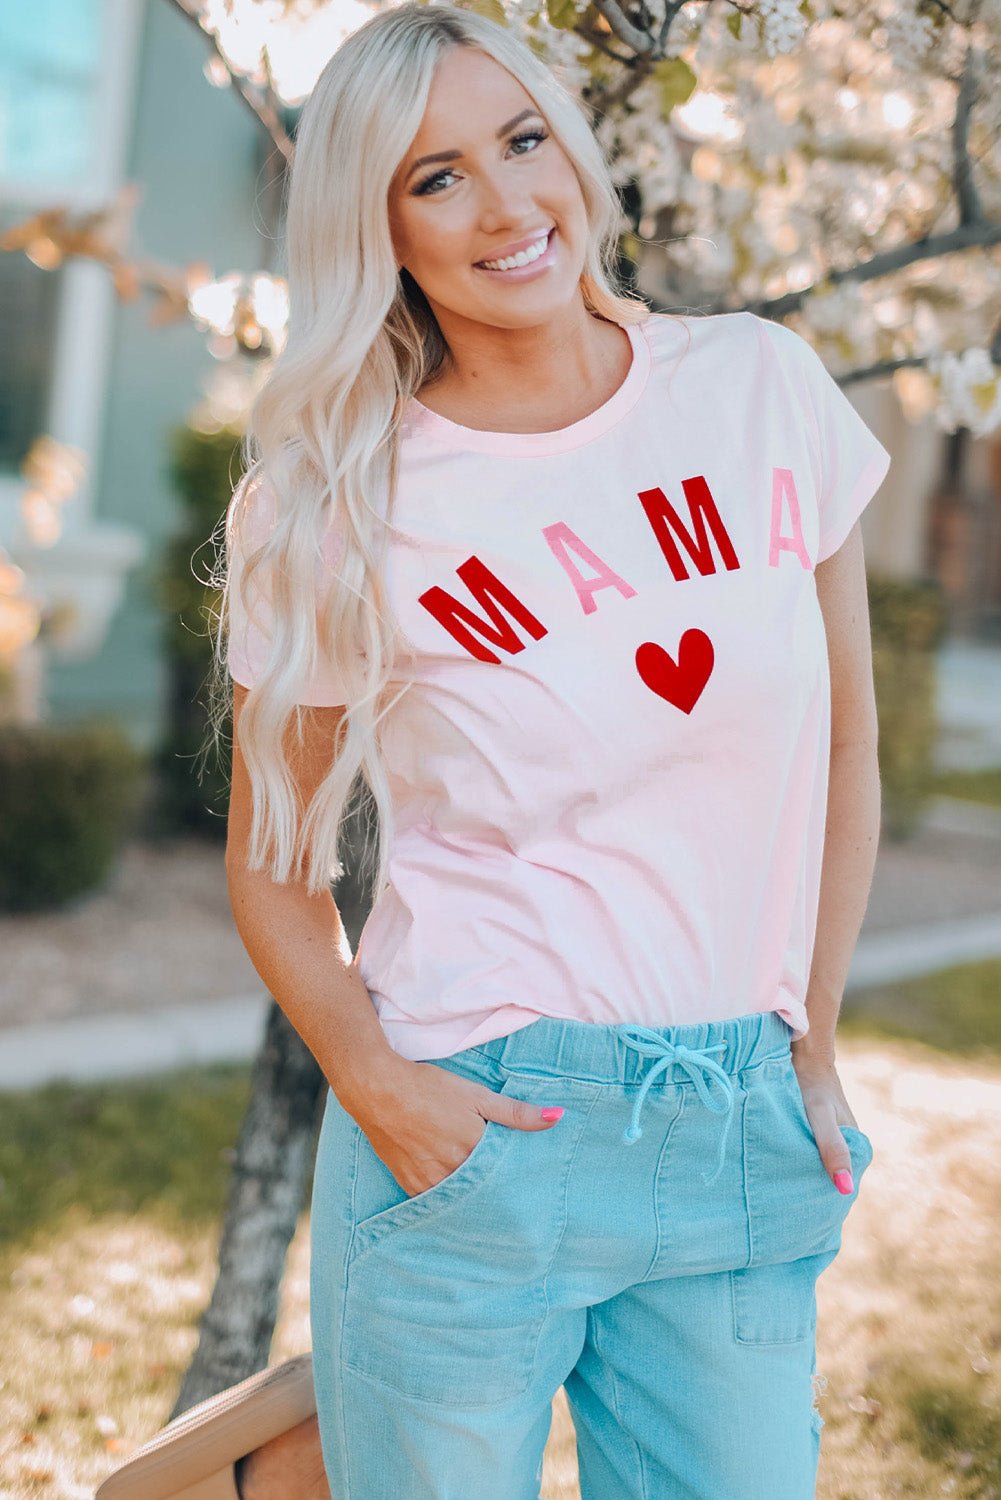 MAMA Heart Graphic Tee - Wear Your Love on Your Sleeve - Celebrate the Romance of Motherhood - Guy Christopher